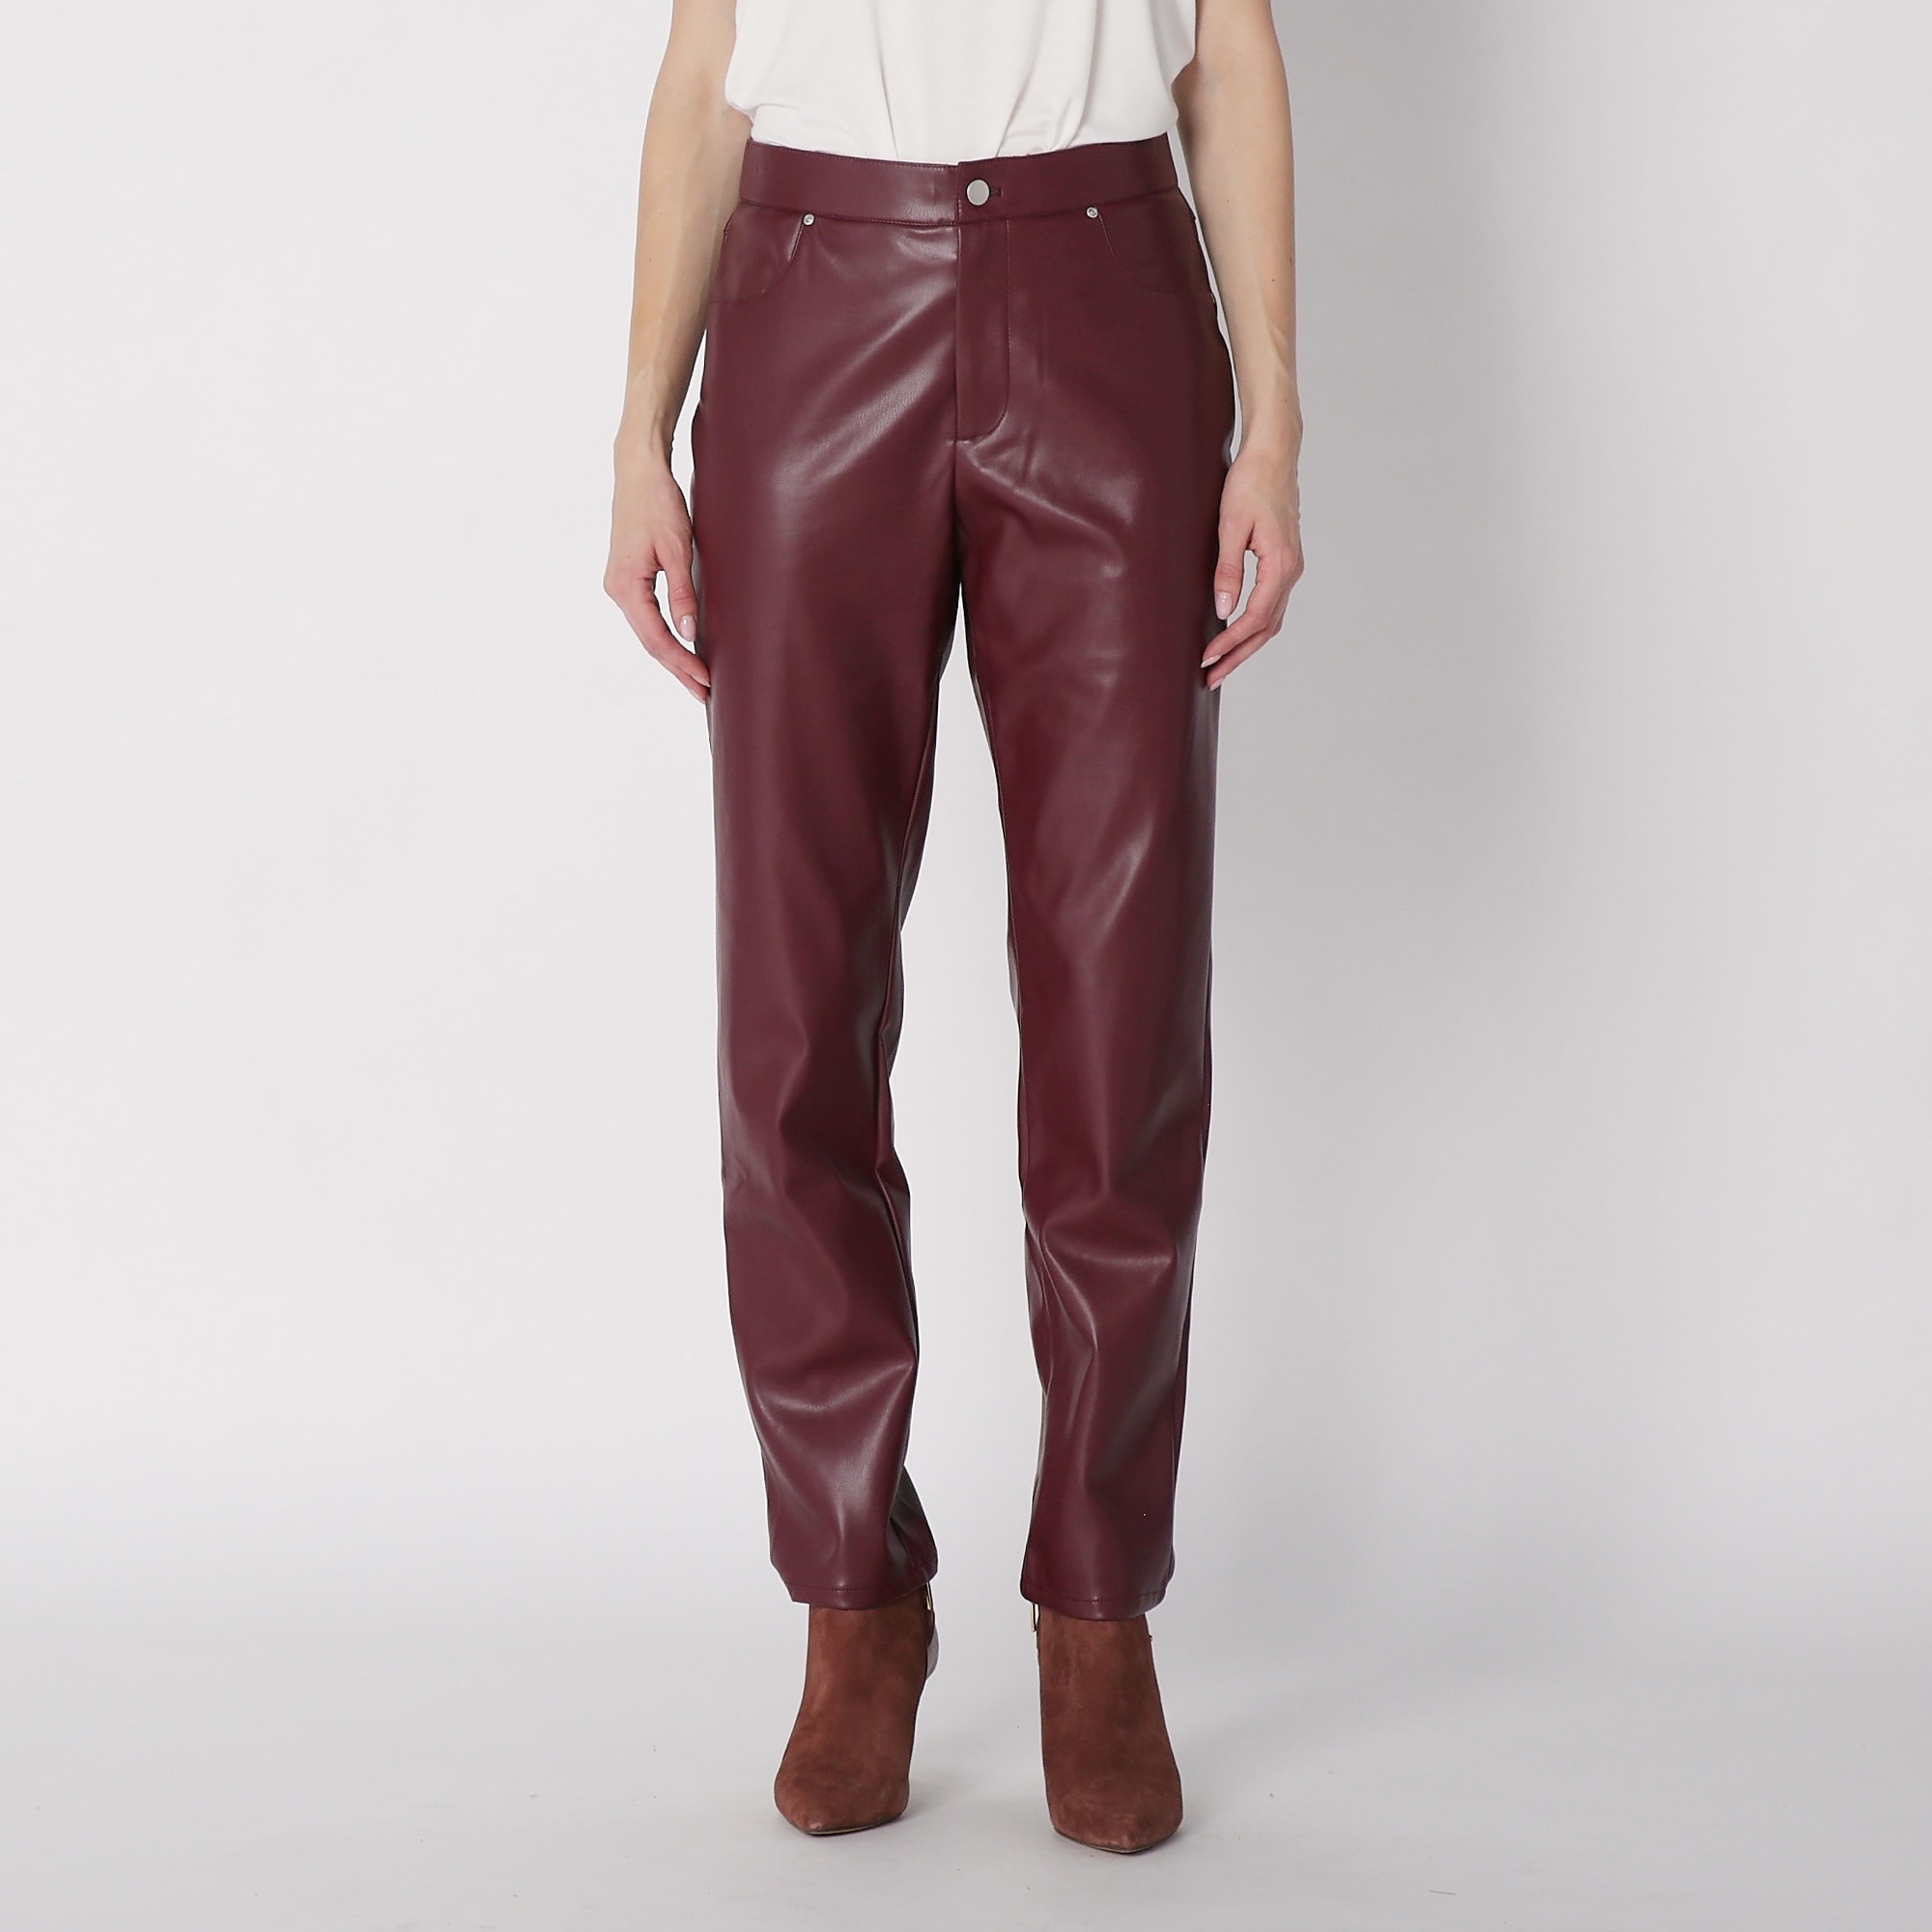 Women's Leather Trousers Jeans, luxury quality (waist 34in/Tan & Burgundy)  - Tout Ensemble